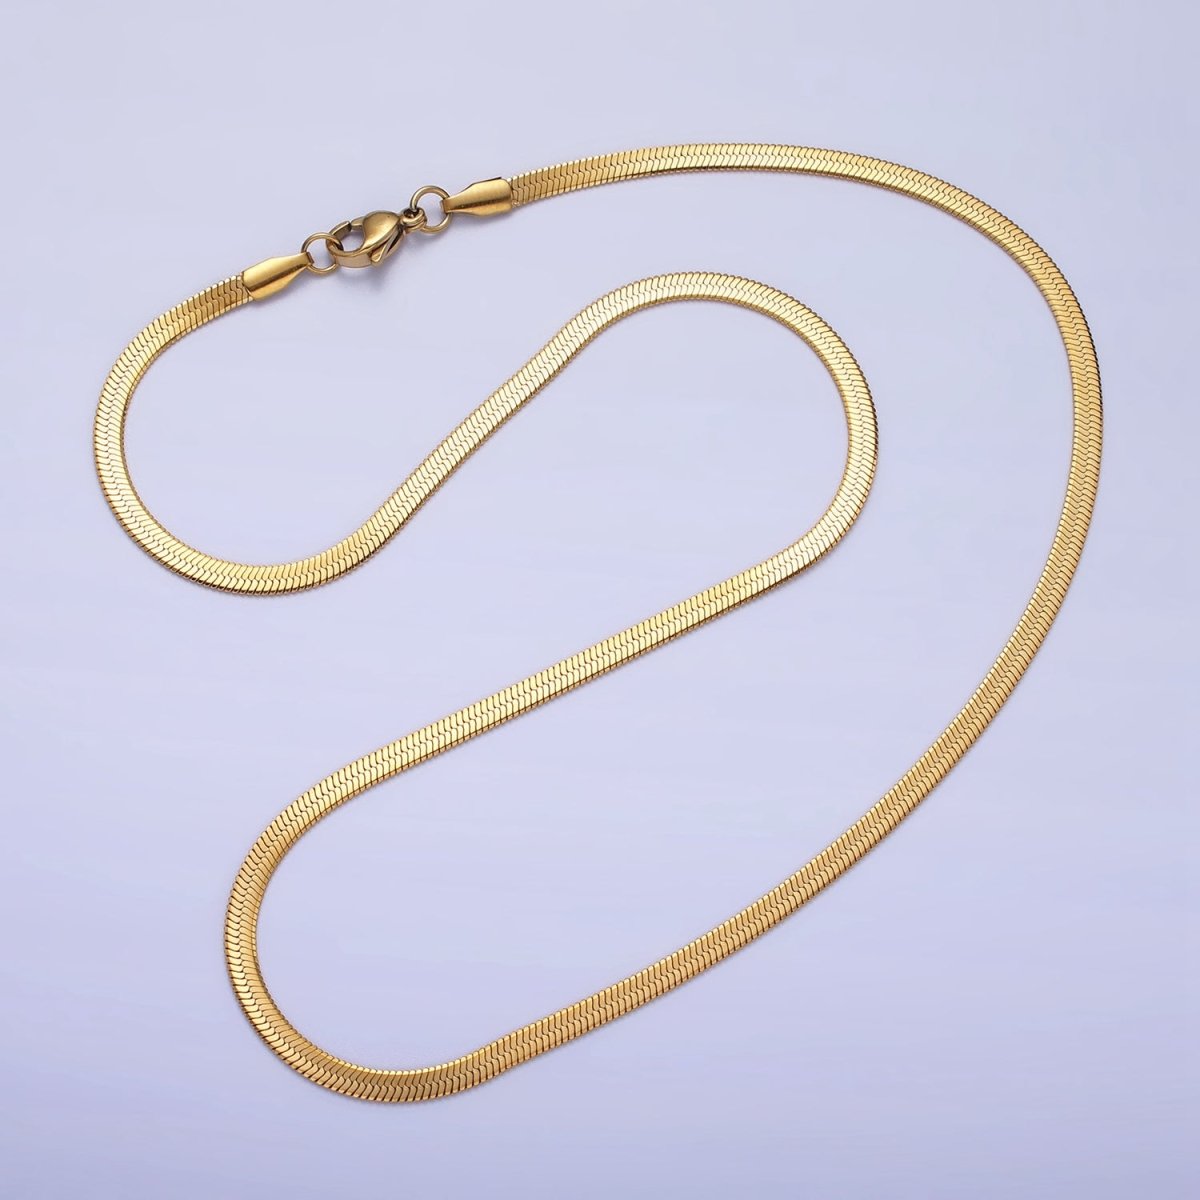 Stainless Steel 3mm Snake Herringbone 19.5 Inch, 17.7 Inch Chain Necklace with Lobster Clasps in Gold & Silver | WA-1617 - WA-1621 Clearance Pricing - DLUXCA